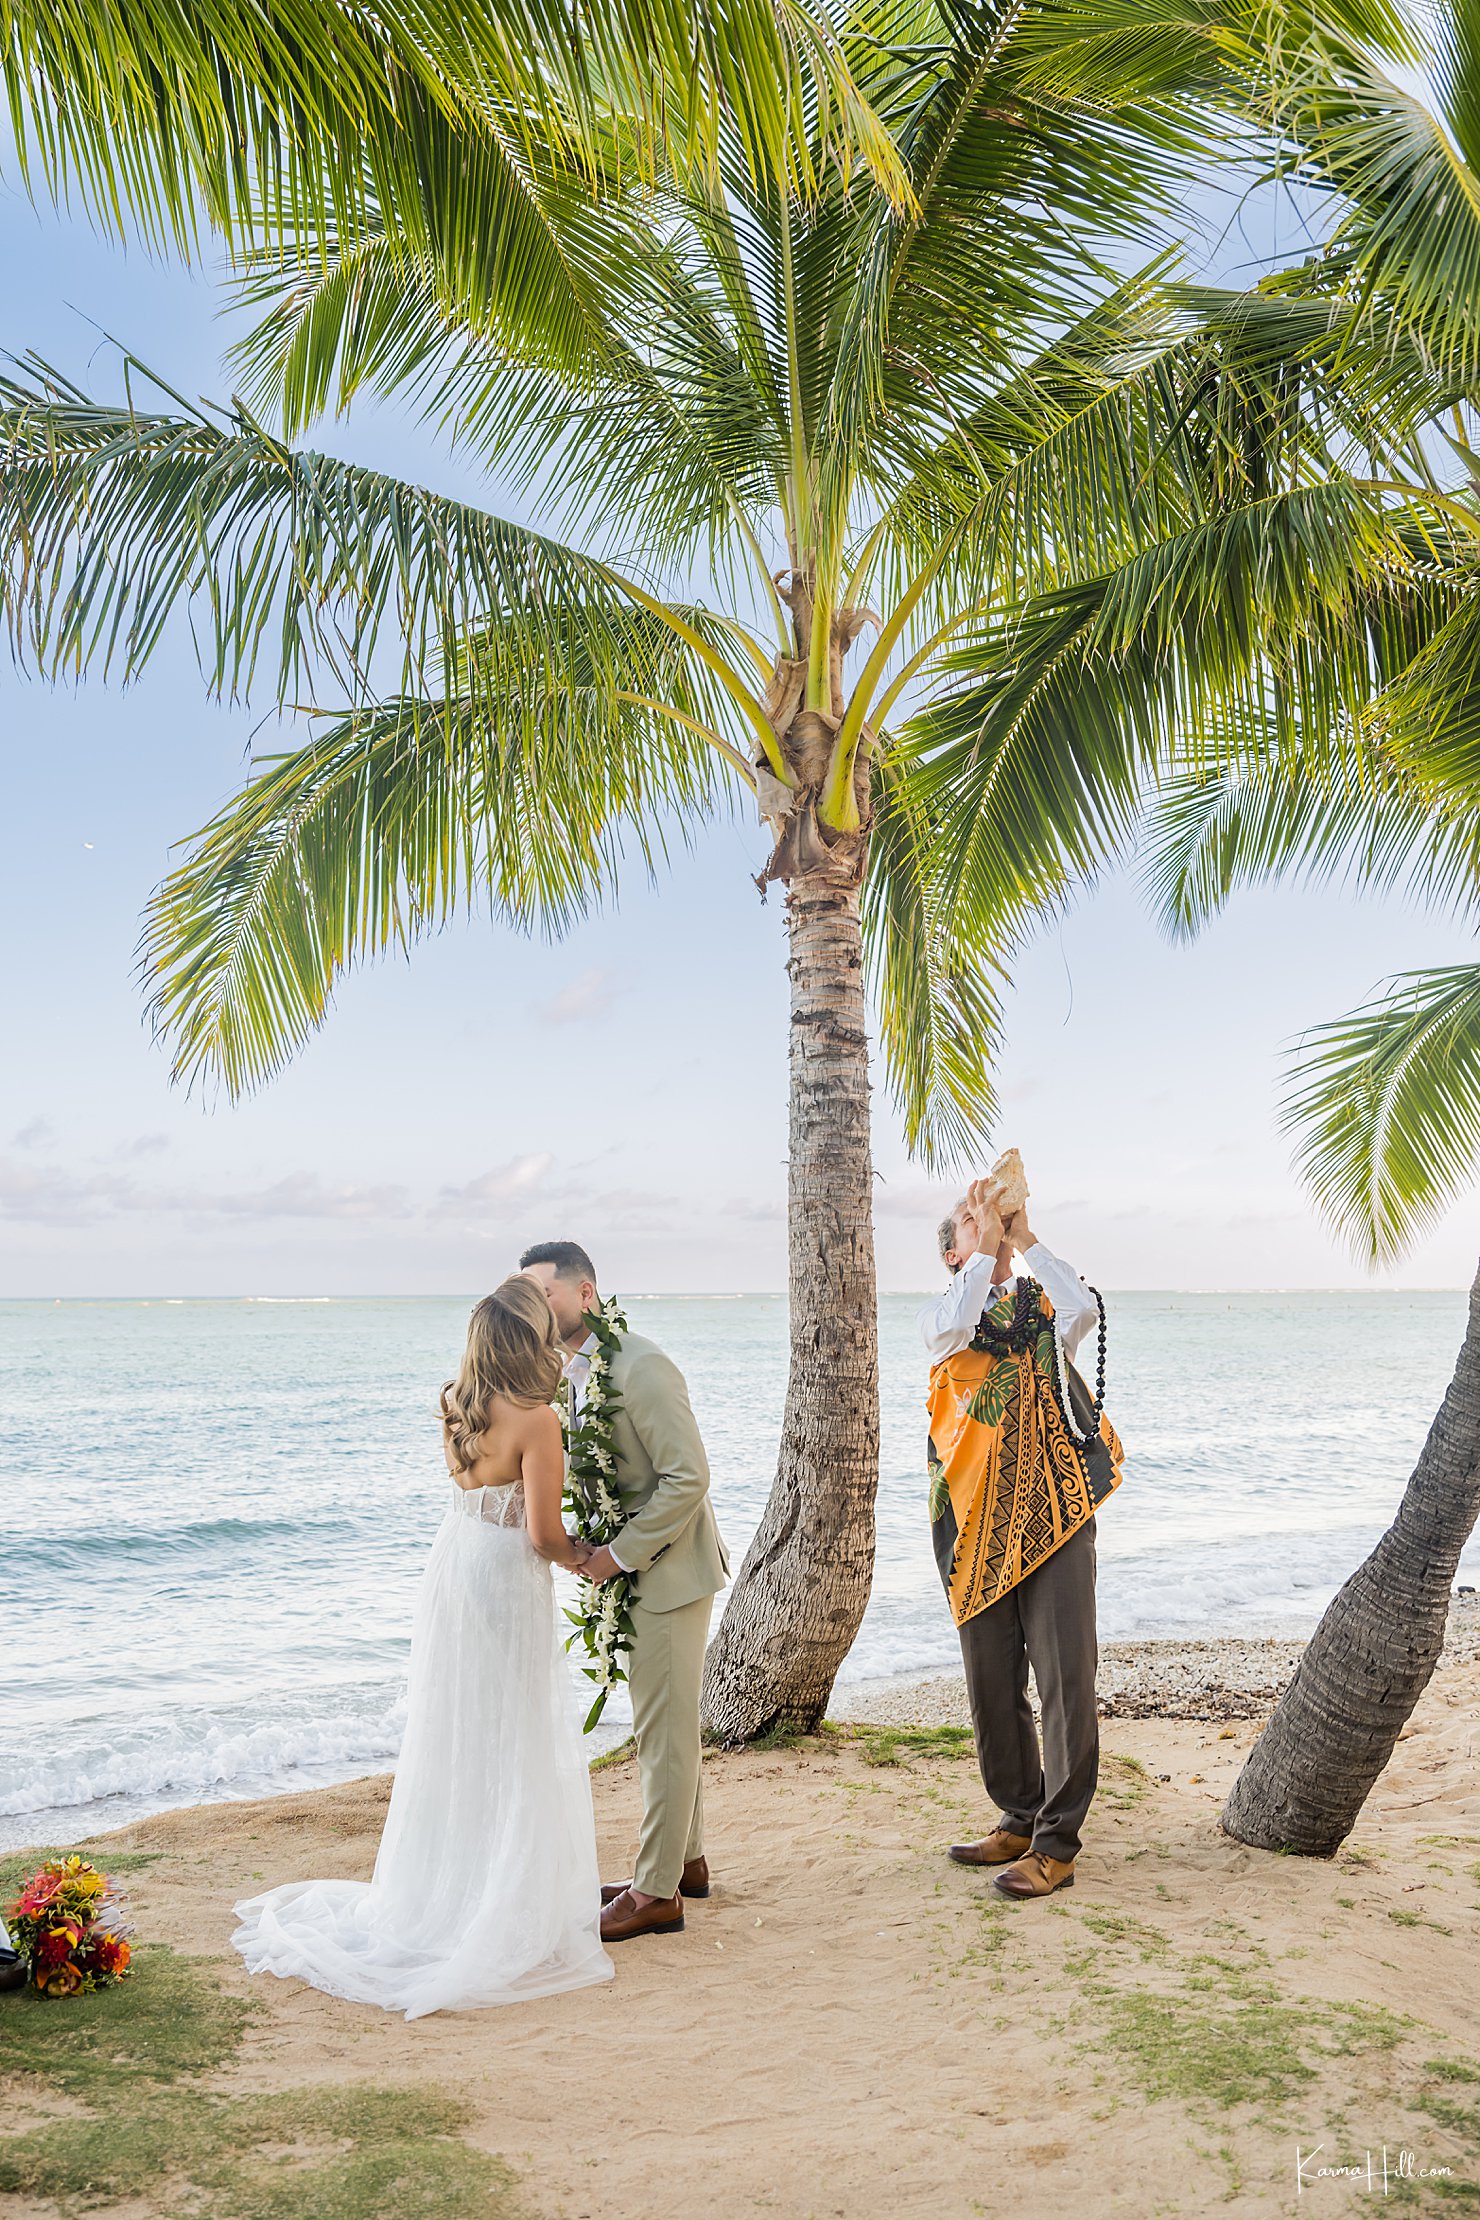 Elope in Oahu and have your first kiss at sunset